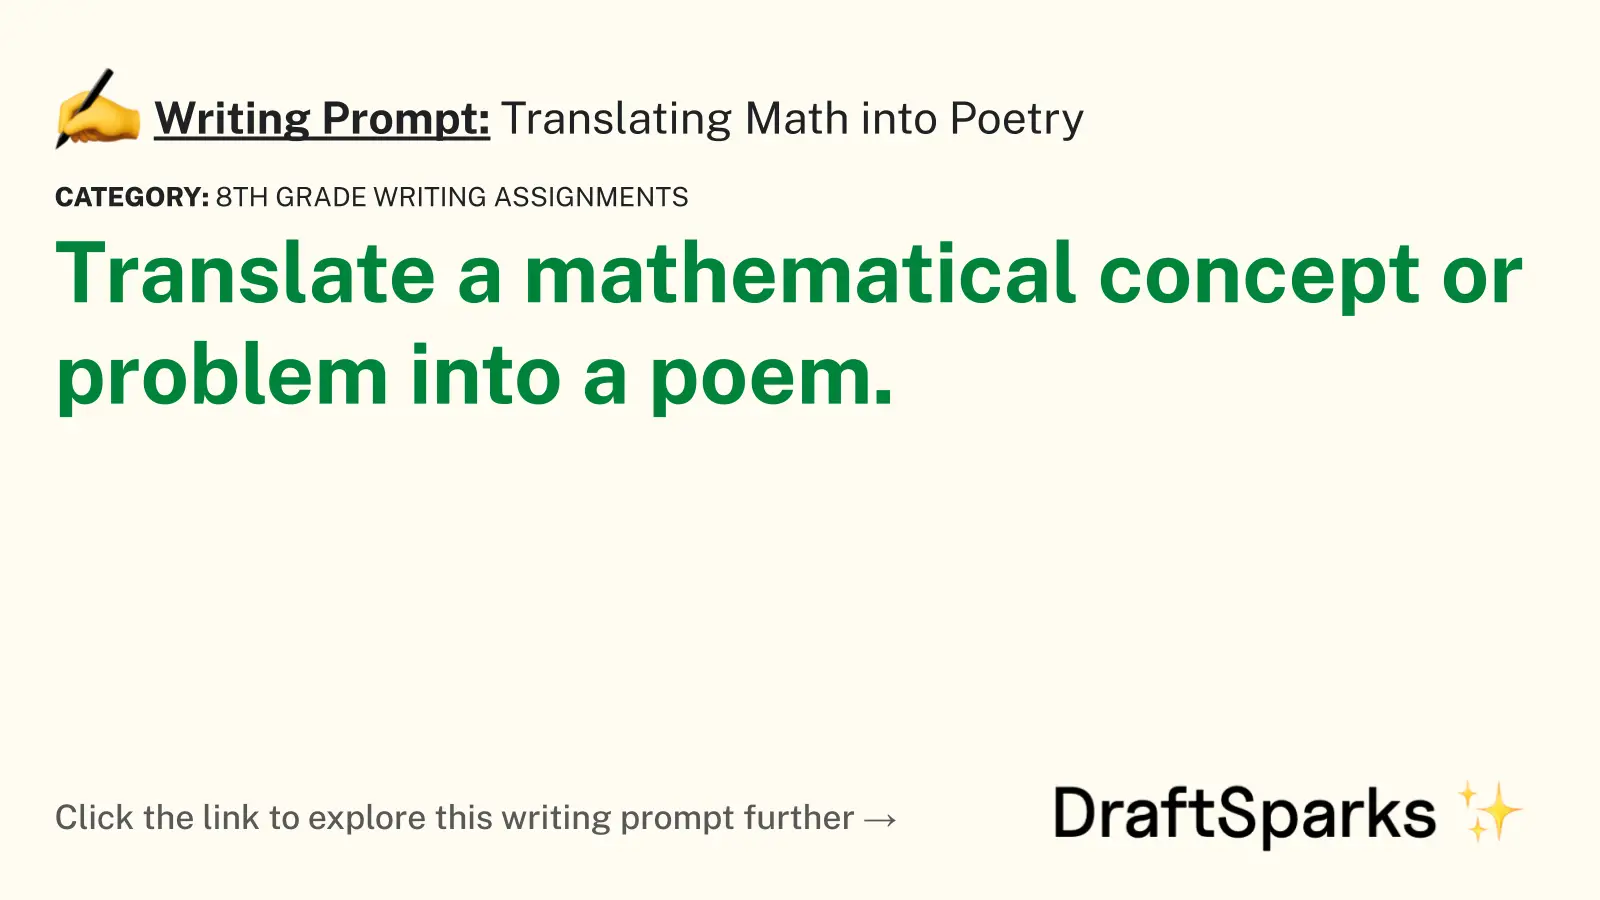 Translating Math into Poetry